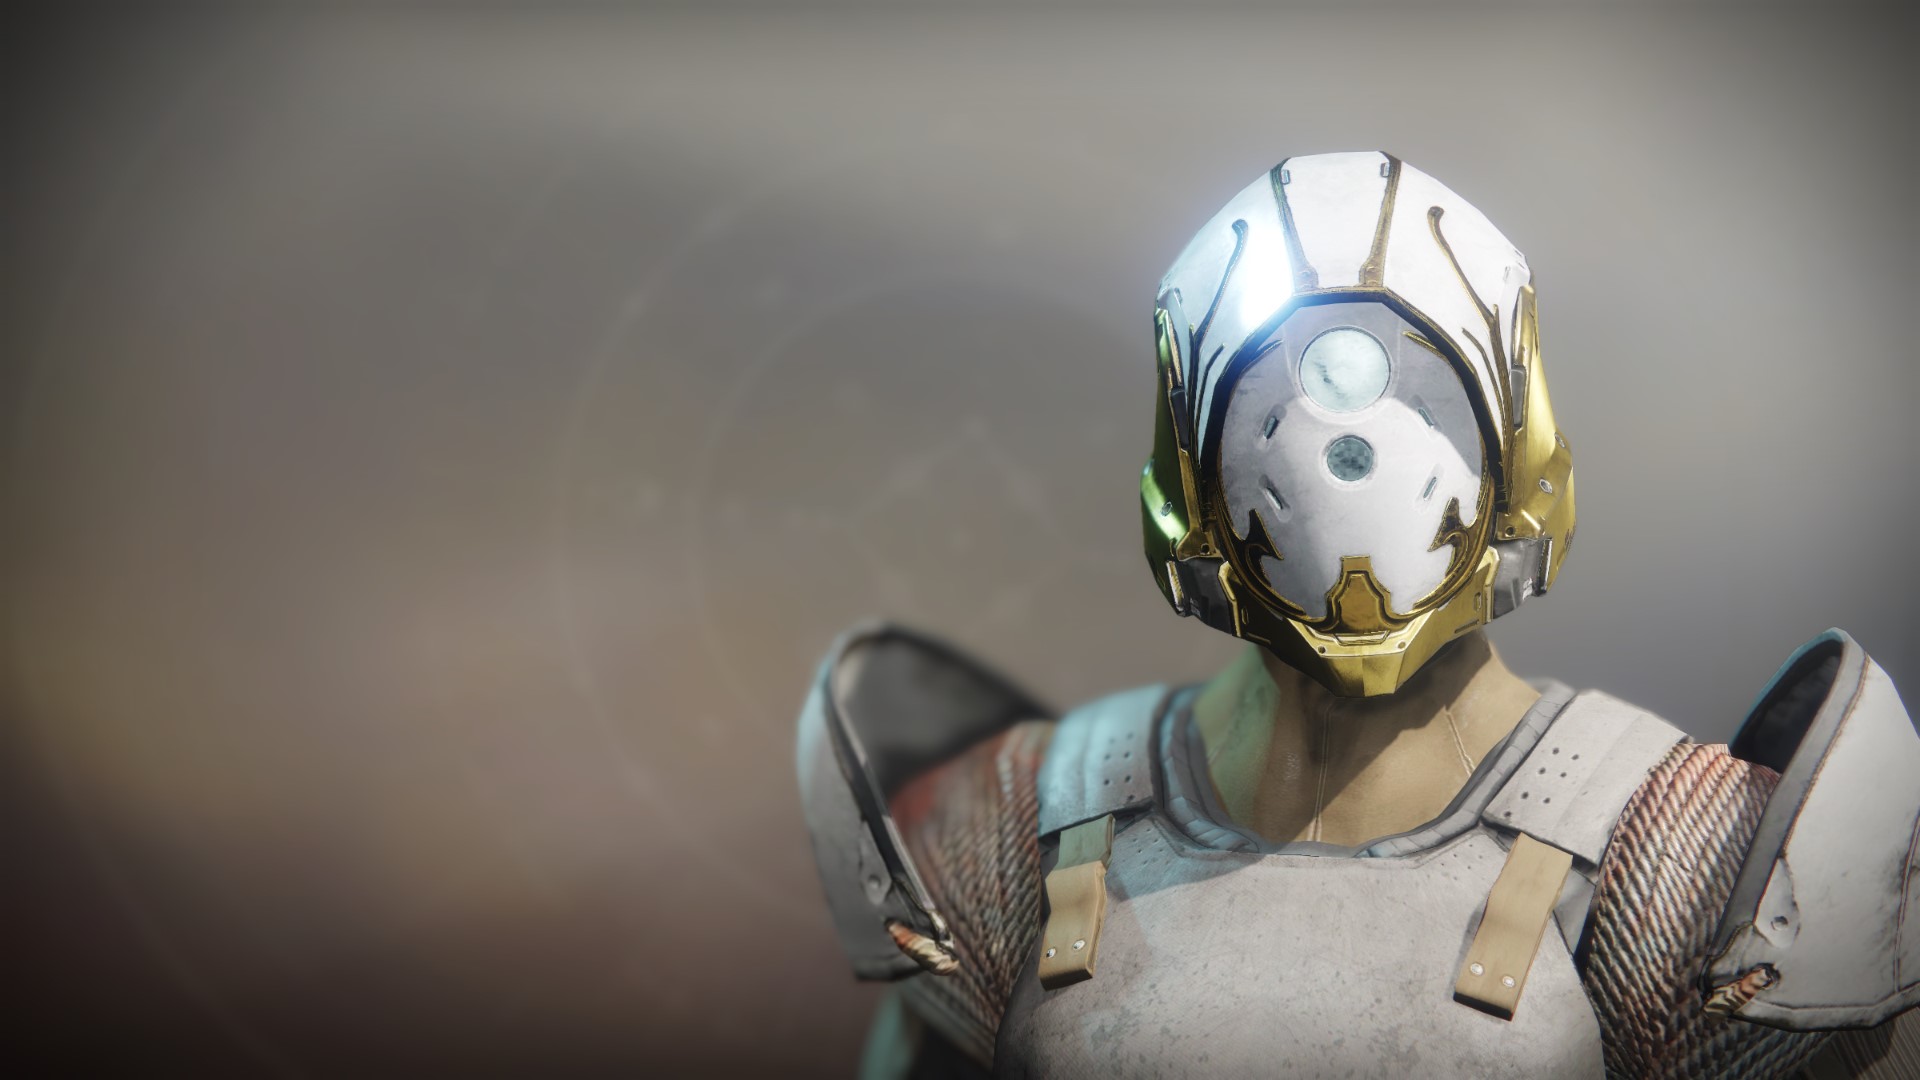 An in-game render of the Solstice Helm (Majestic).